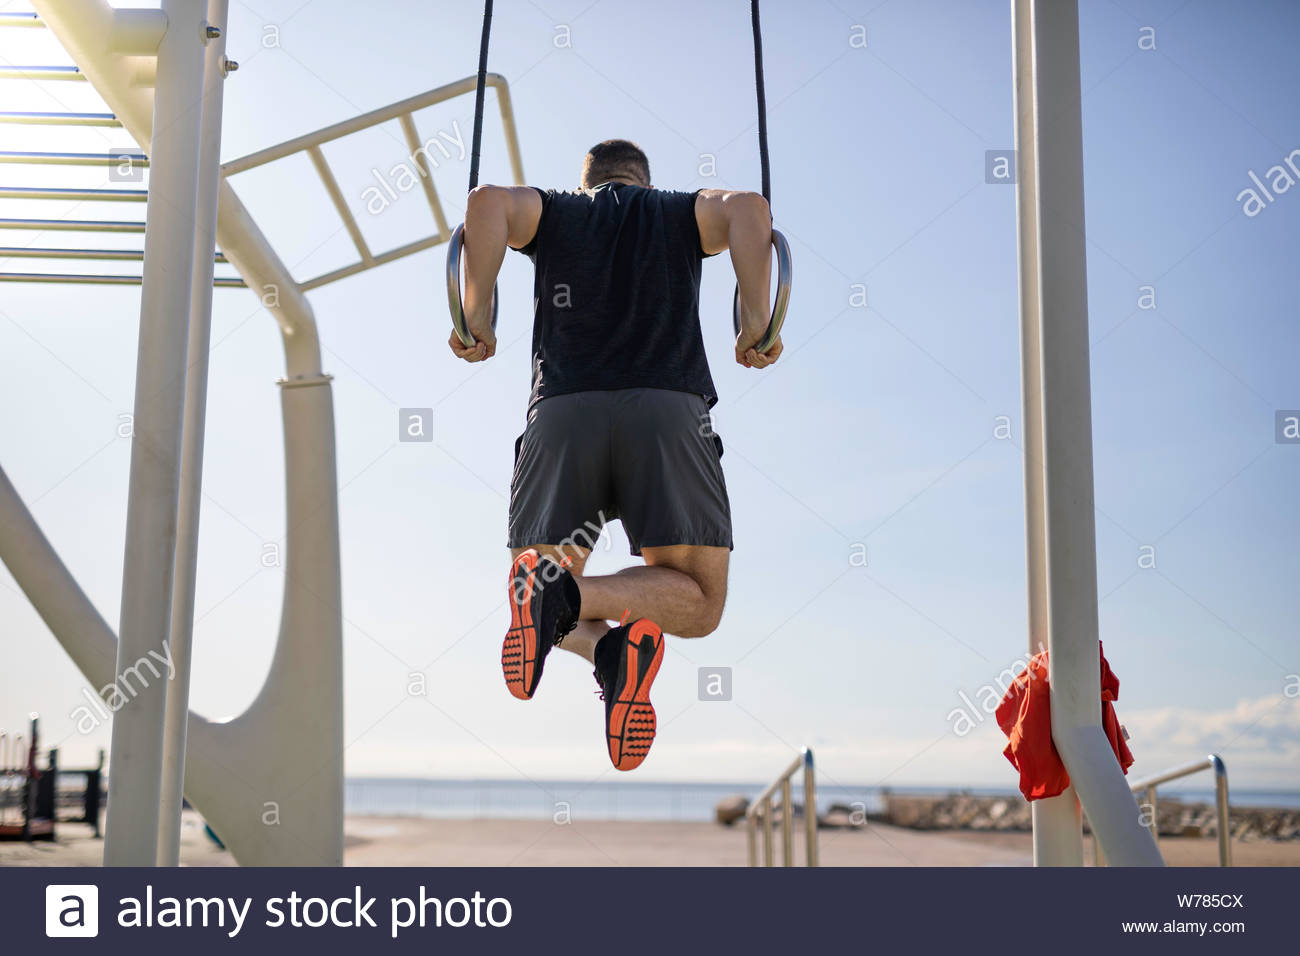 Handsome strong man hanging on gymnastics rings at outdoor ...